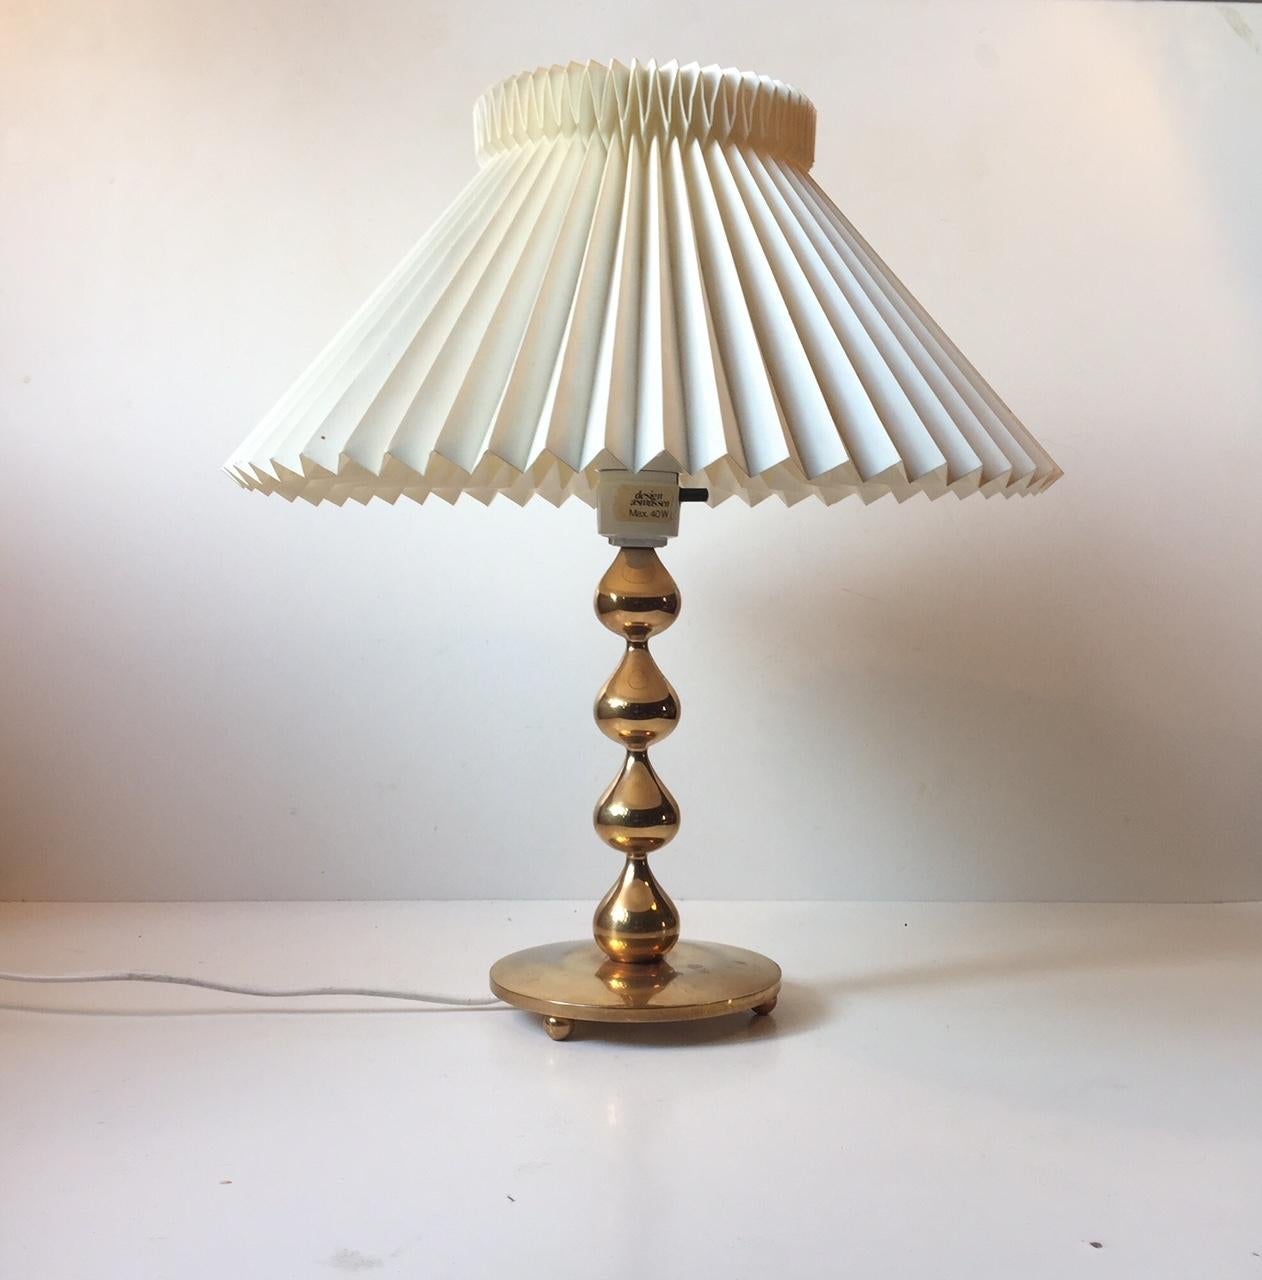 This gold-plated table light is composed of 4 intervened drops. It was designed during the 1960s by Hugo Asmussen in Denmark. This is an example from the late 1970s. The base/foot of the light shows ware, patina and has been polished. The shade is a